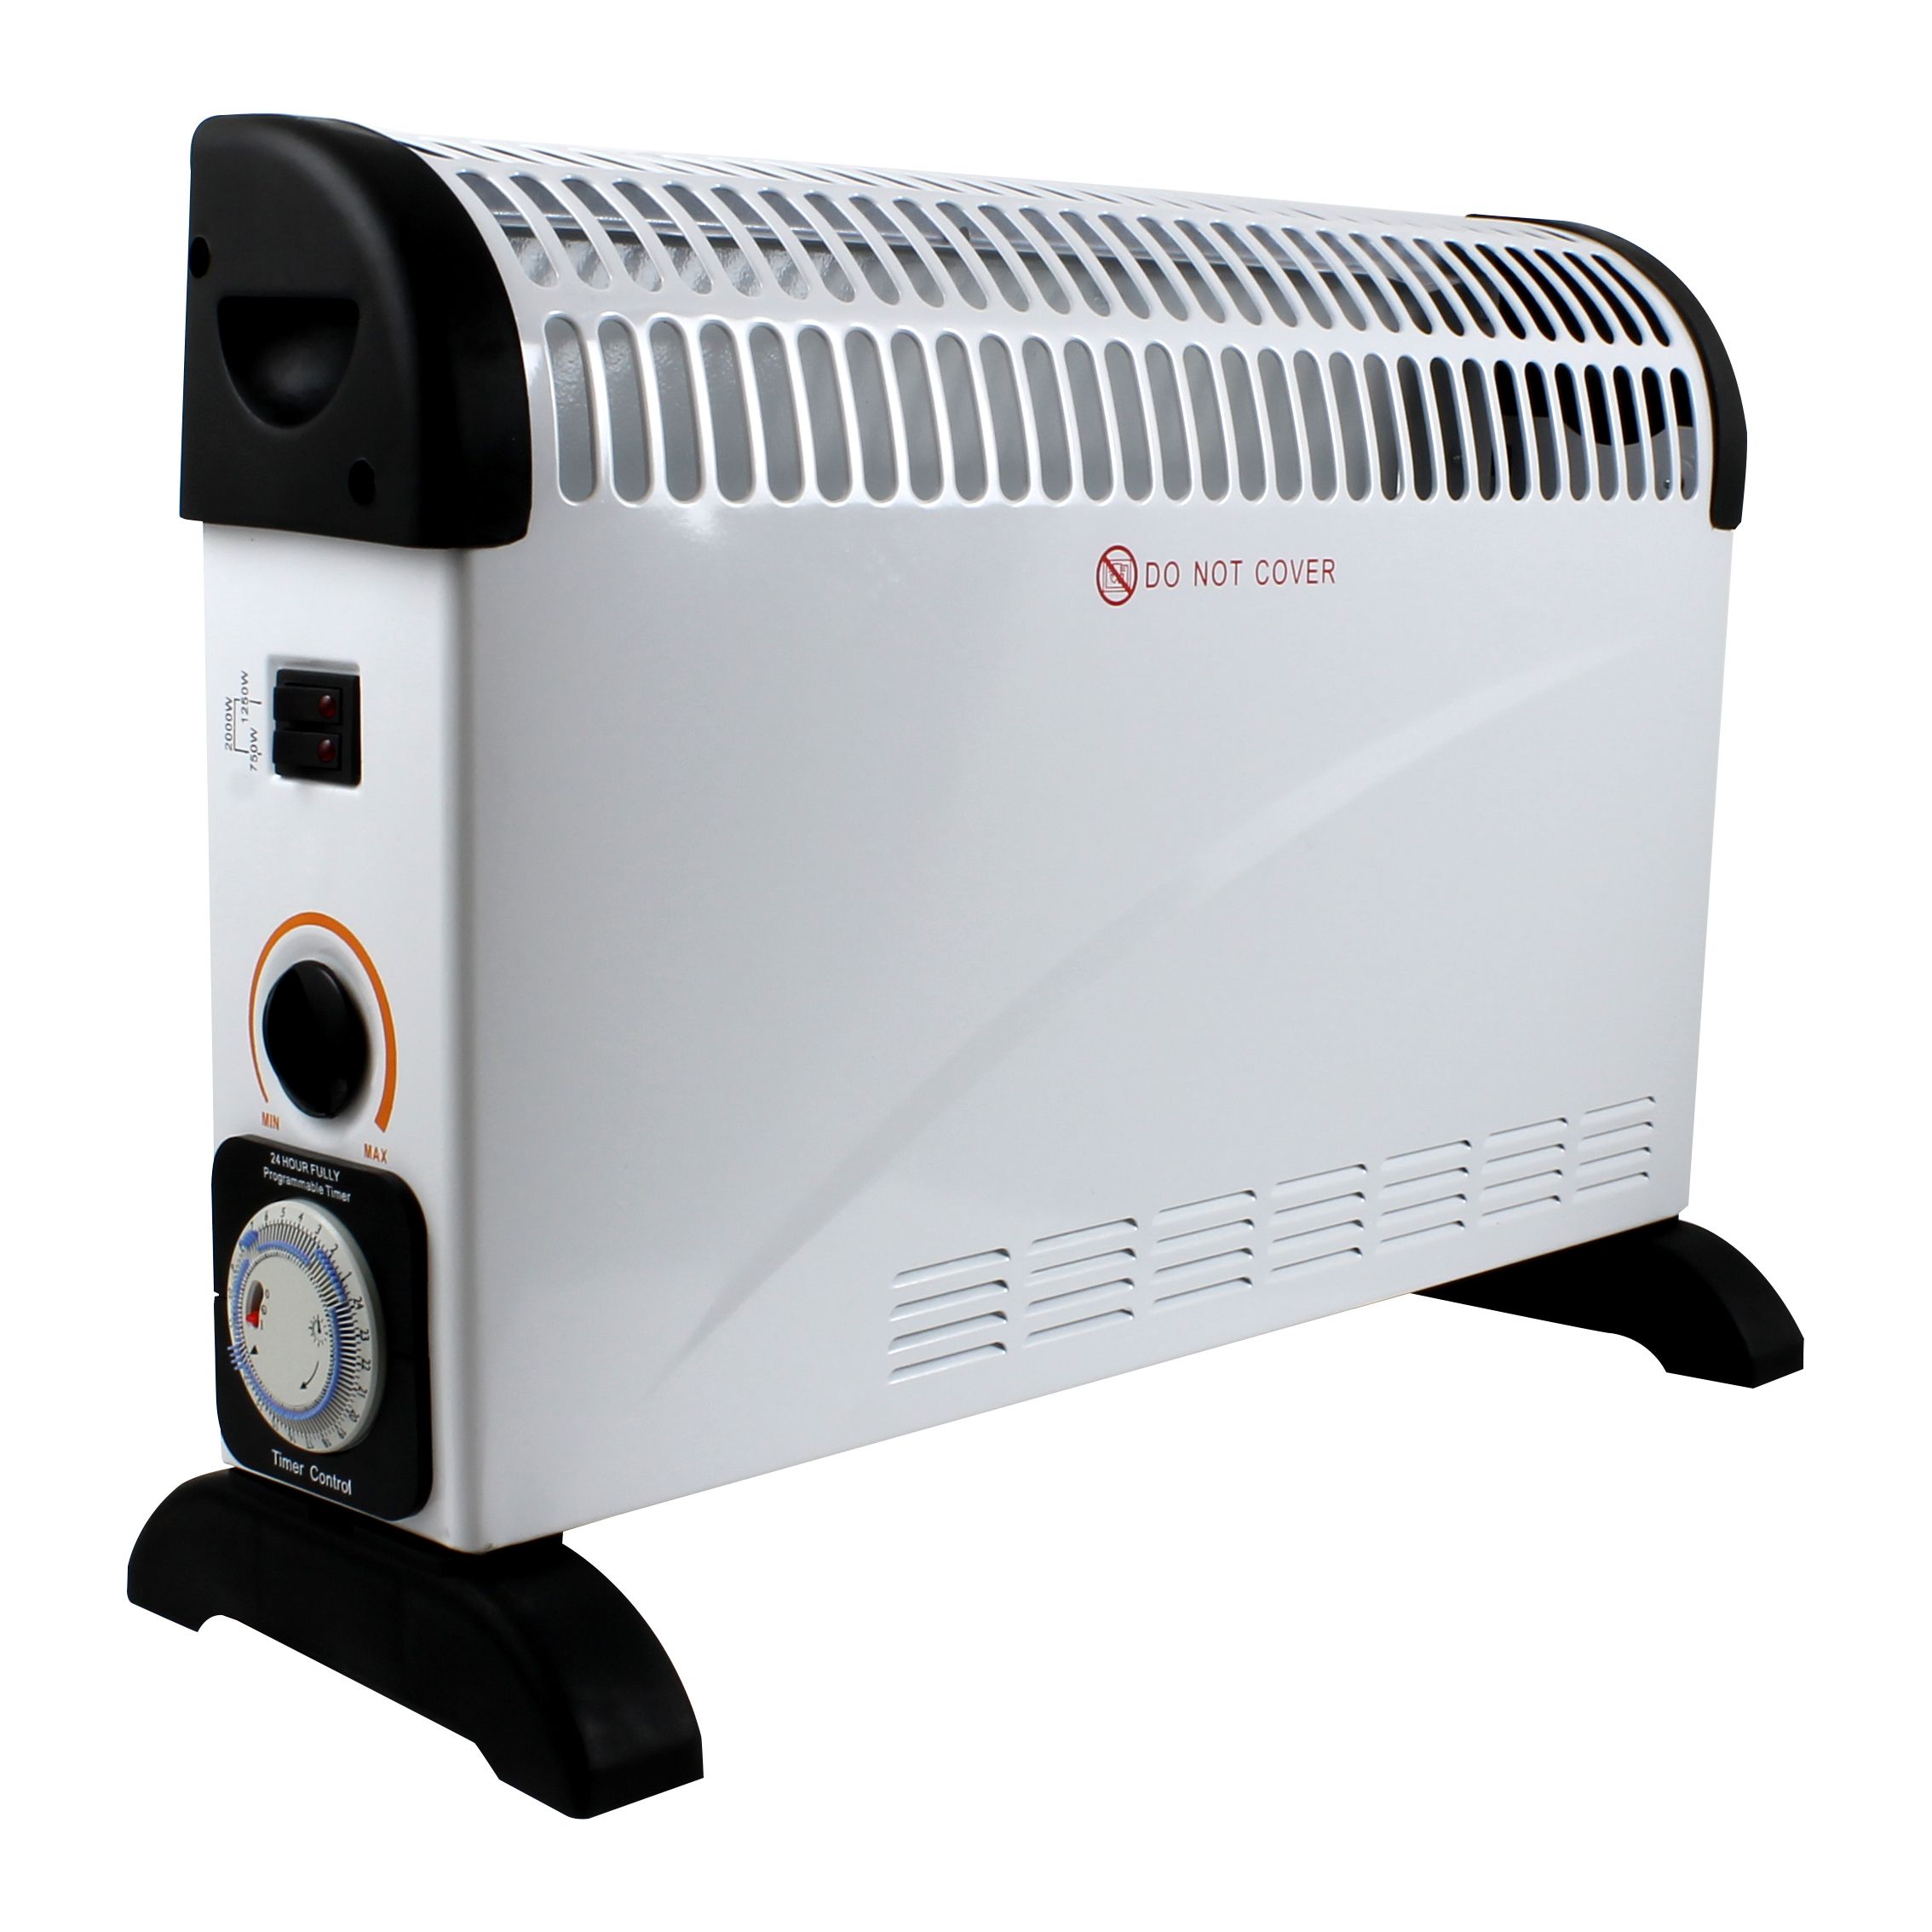 RS PRO 2kW Convector Heater, Portable, Type G - British 3-pin